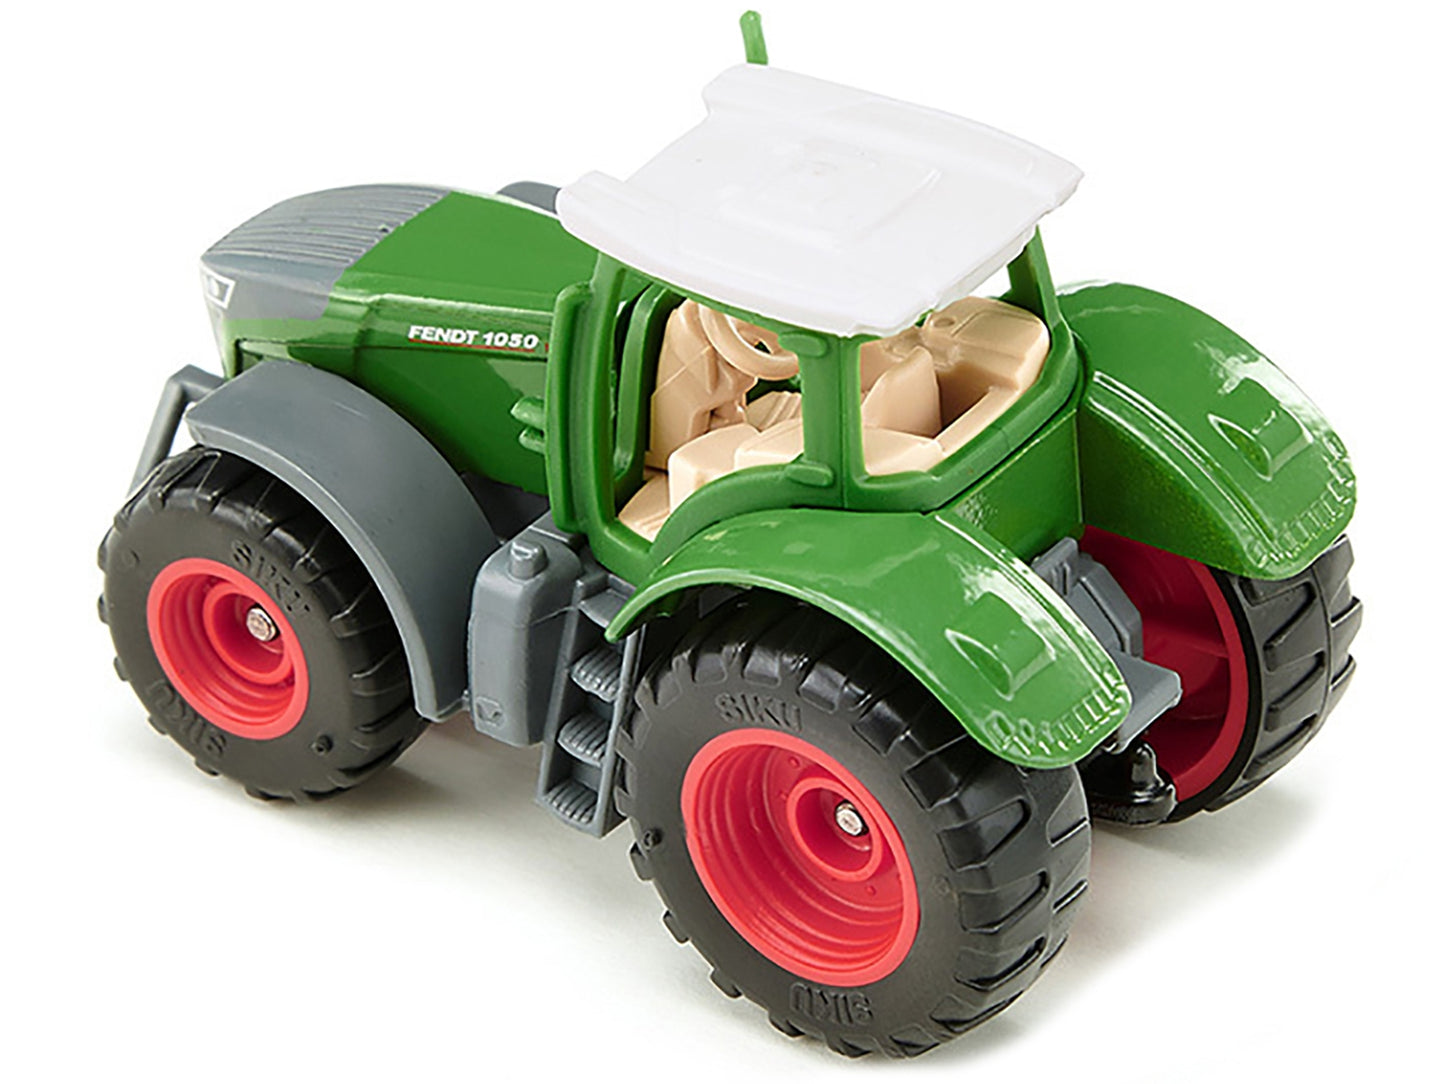 Fendt 1050 Vario Tractor Green with White Top Diecast Model by Siku